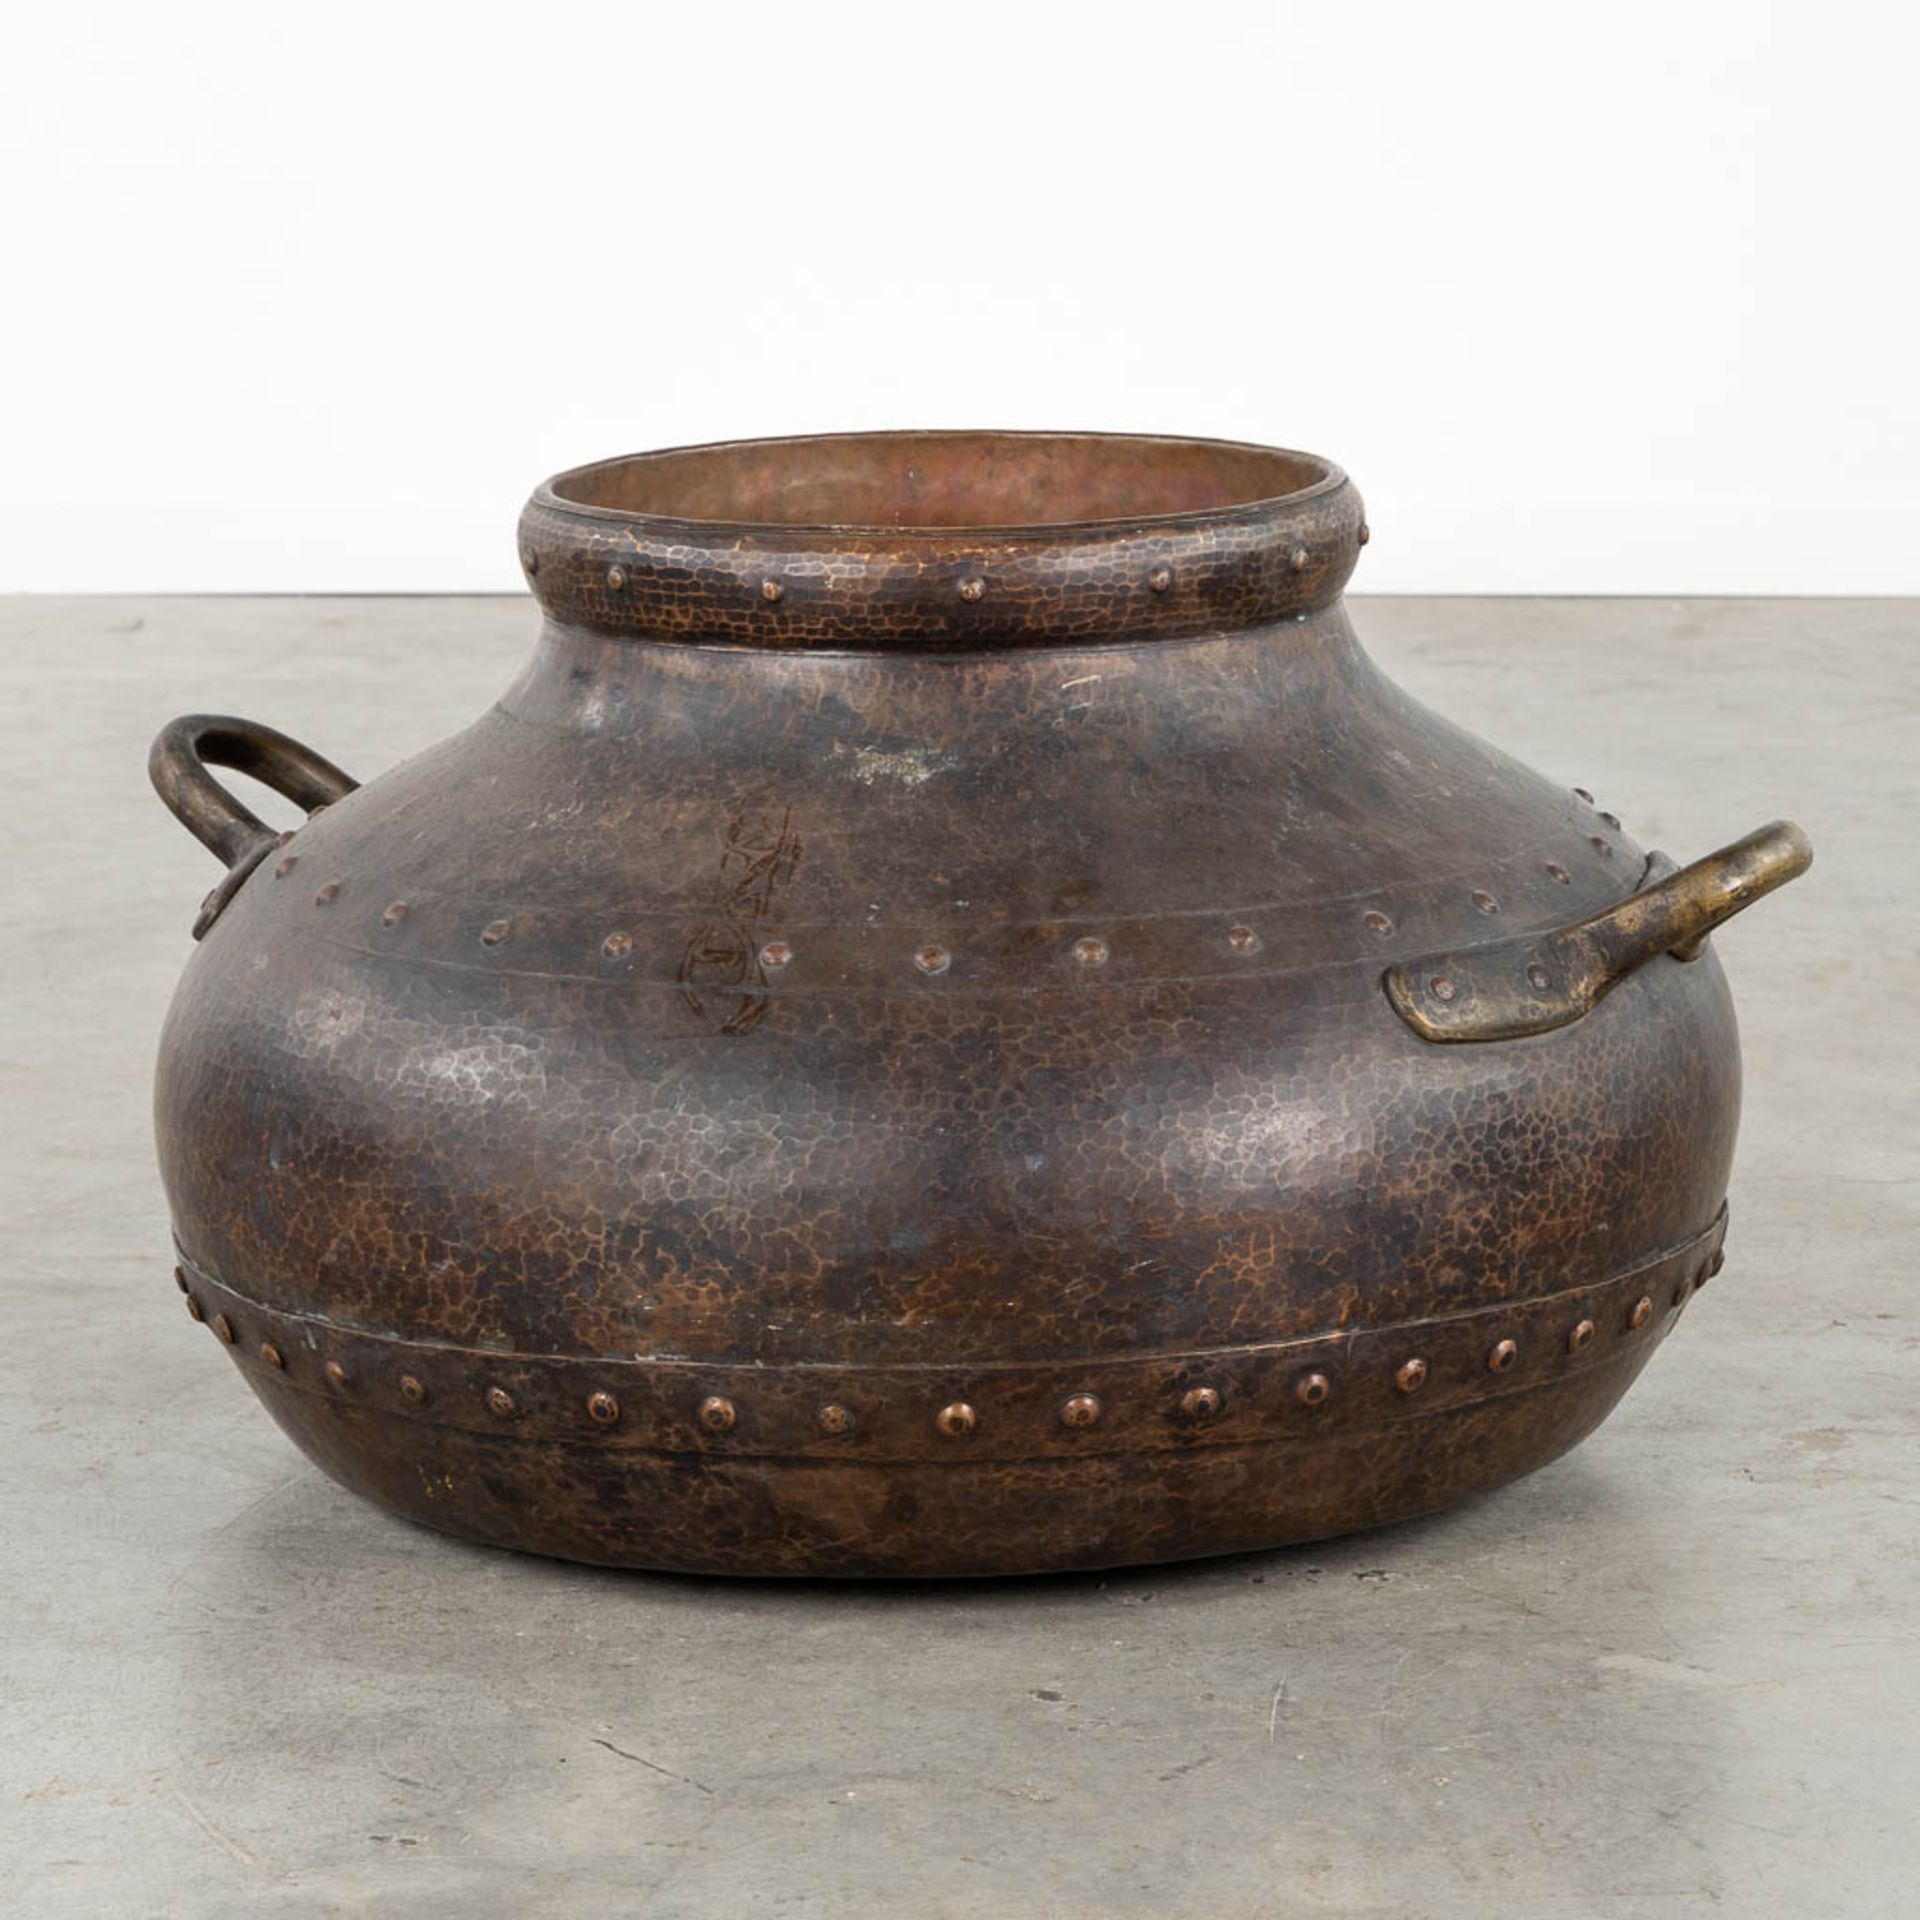 A large kettle, copper with brass rivets. (L:70 x W:80 x H:45 cm)